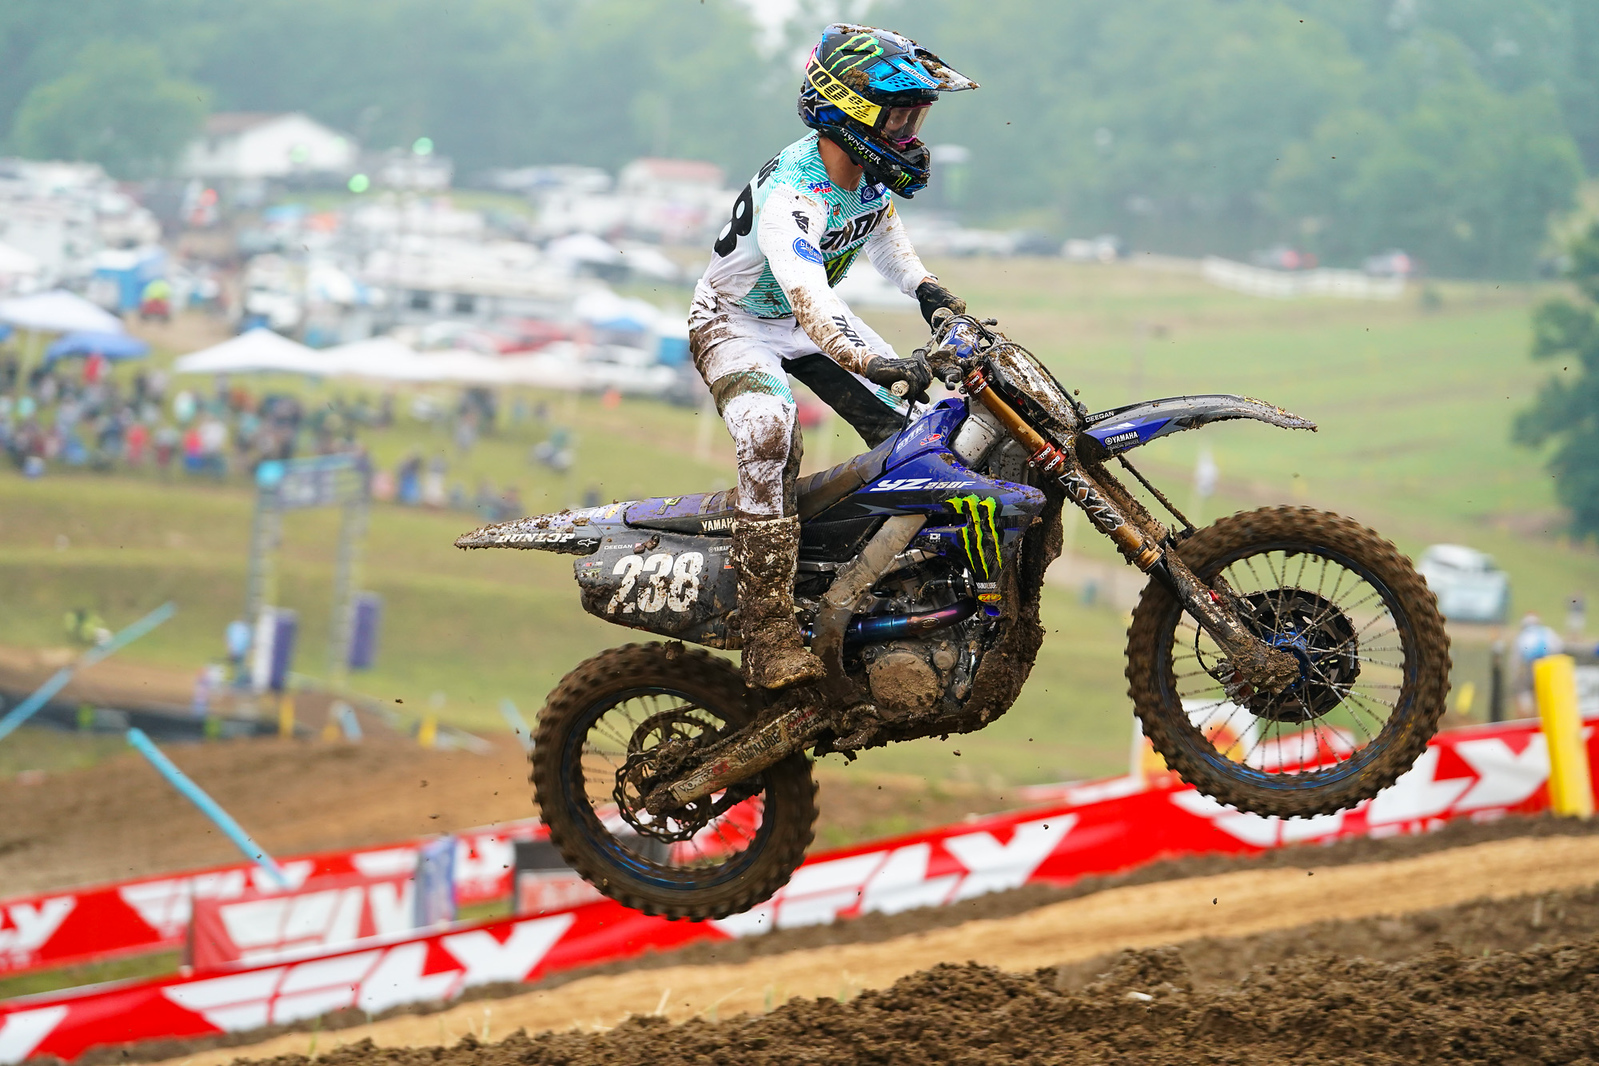 2023 High Point Motocross Qualifying Report & Results Swapmoto Live